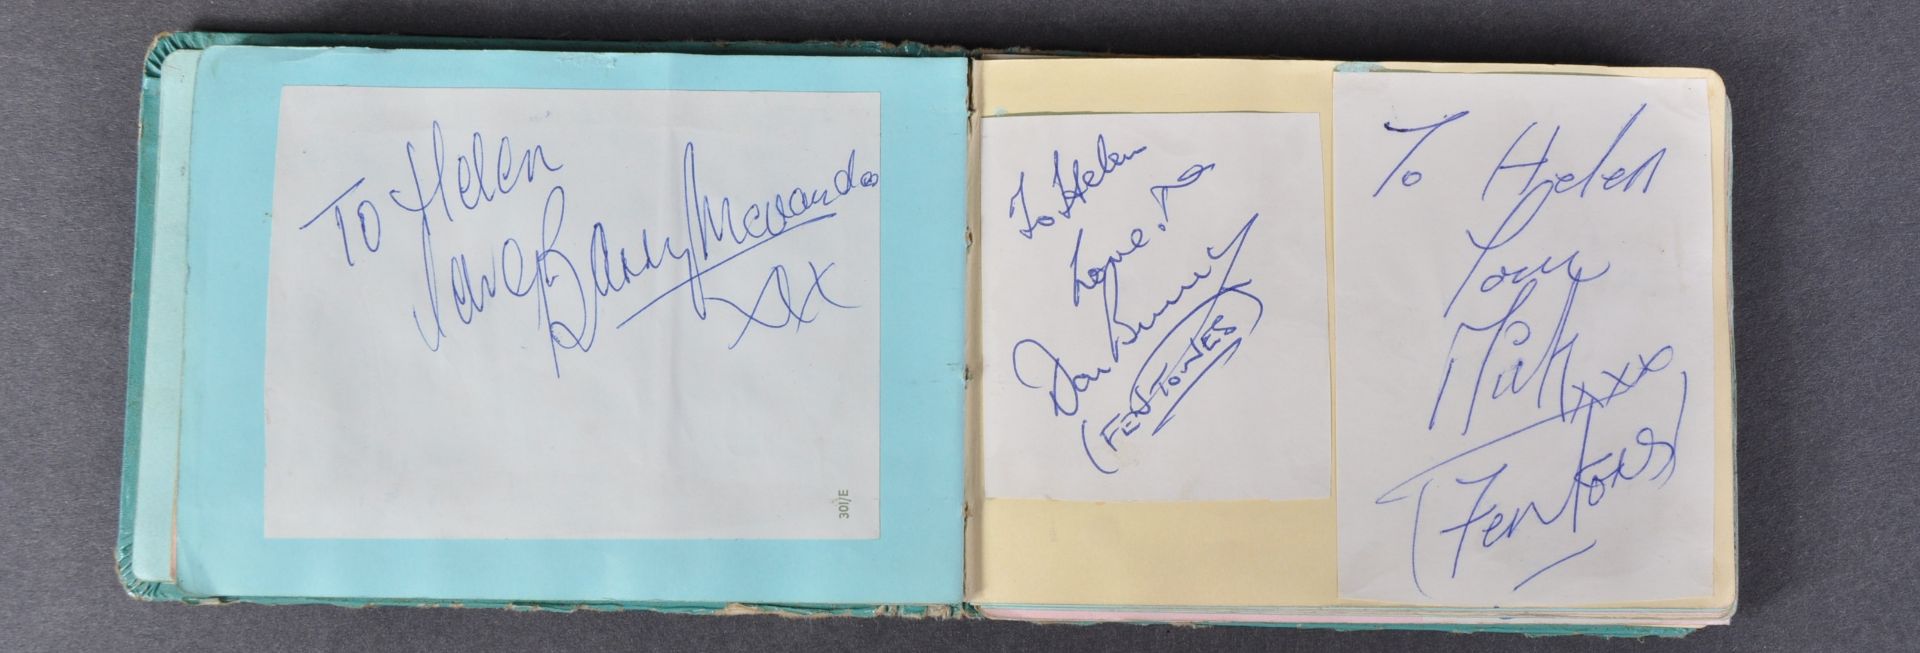 1960S MUSIC AUTOGRAPH ALBUMS - OBTAINED FROM DISCS-A-GOGO - Image 15 of 31